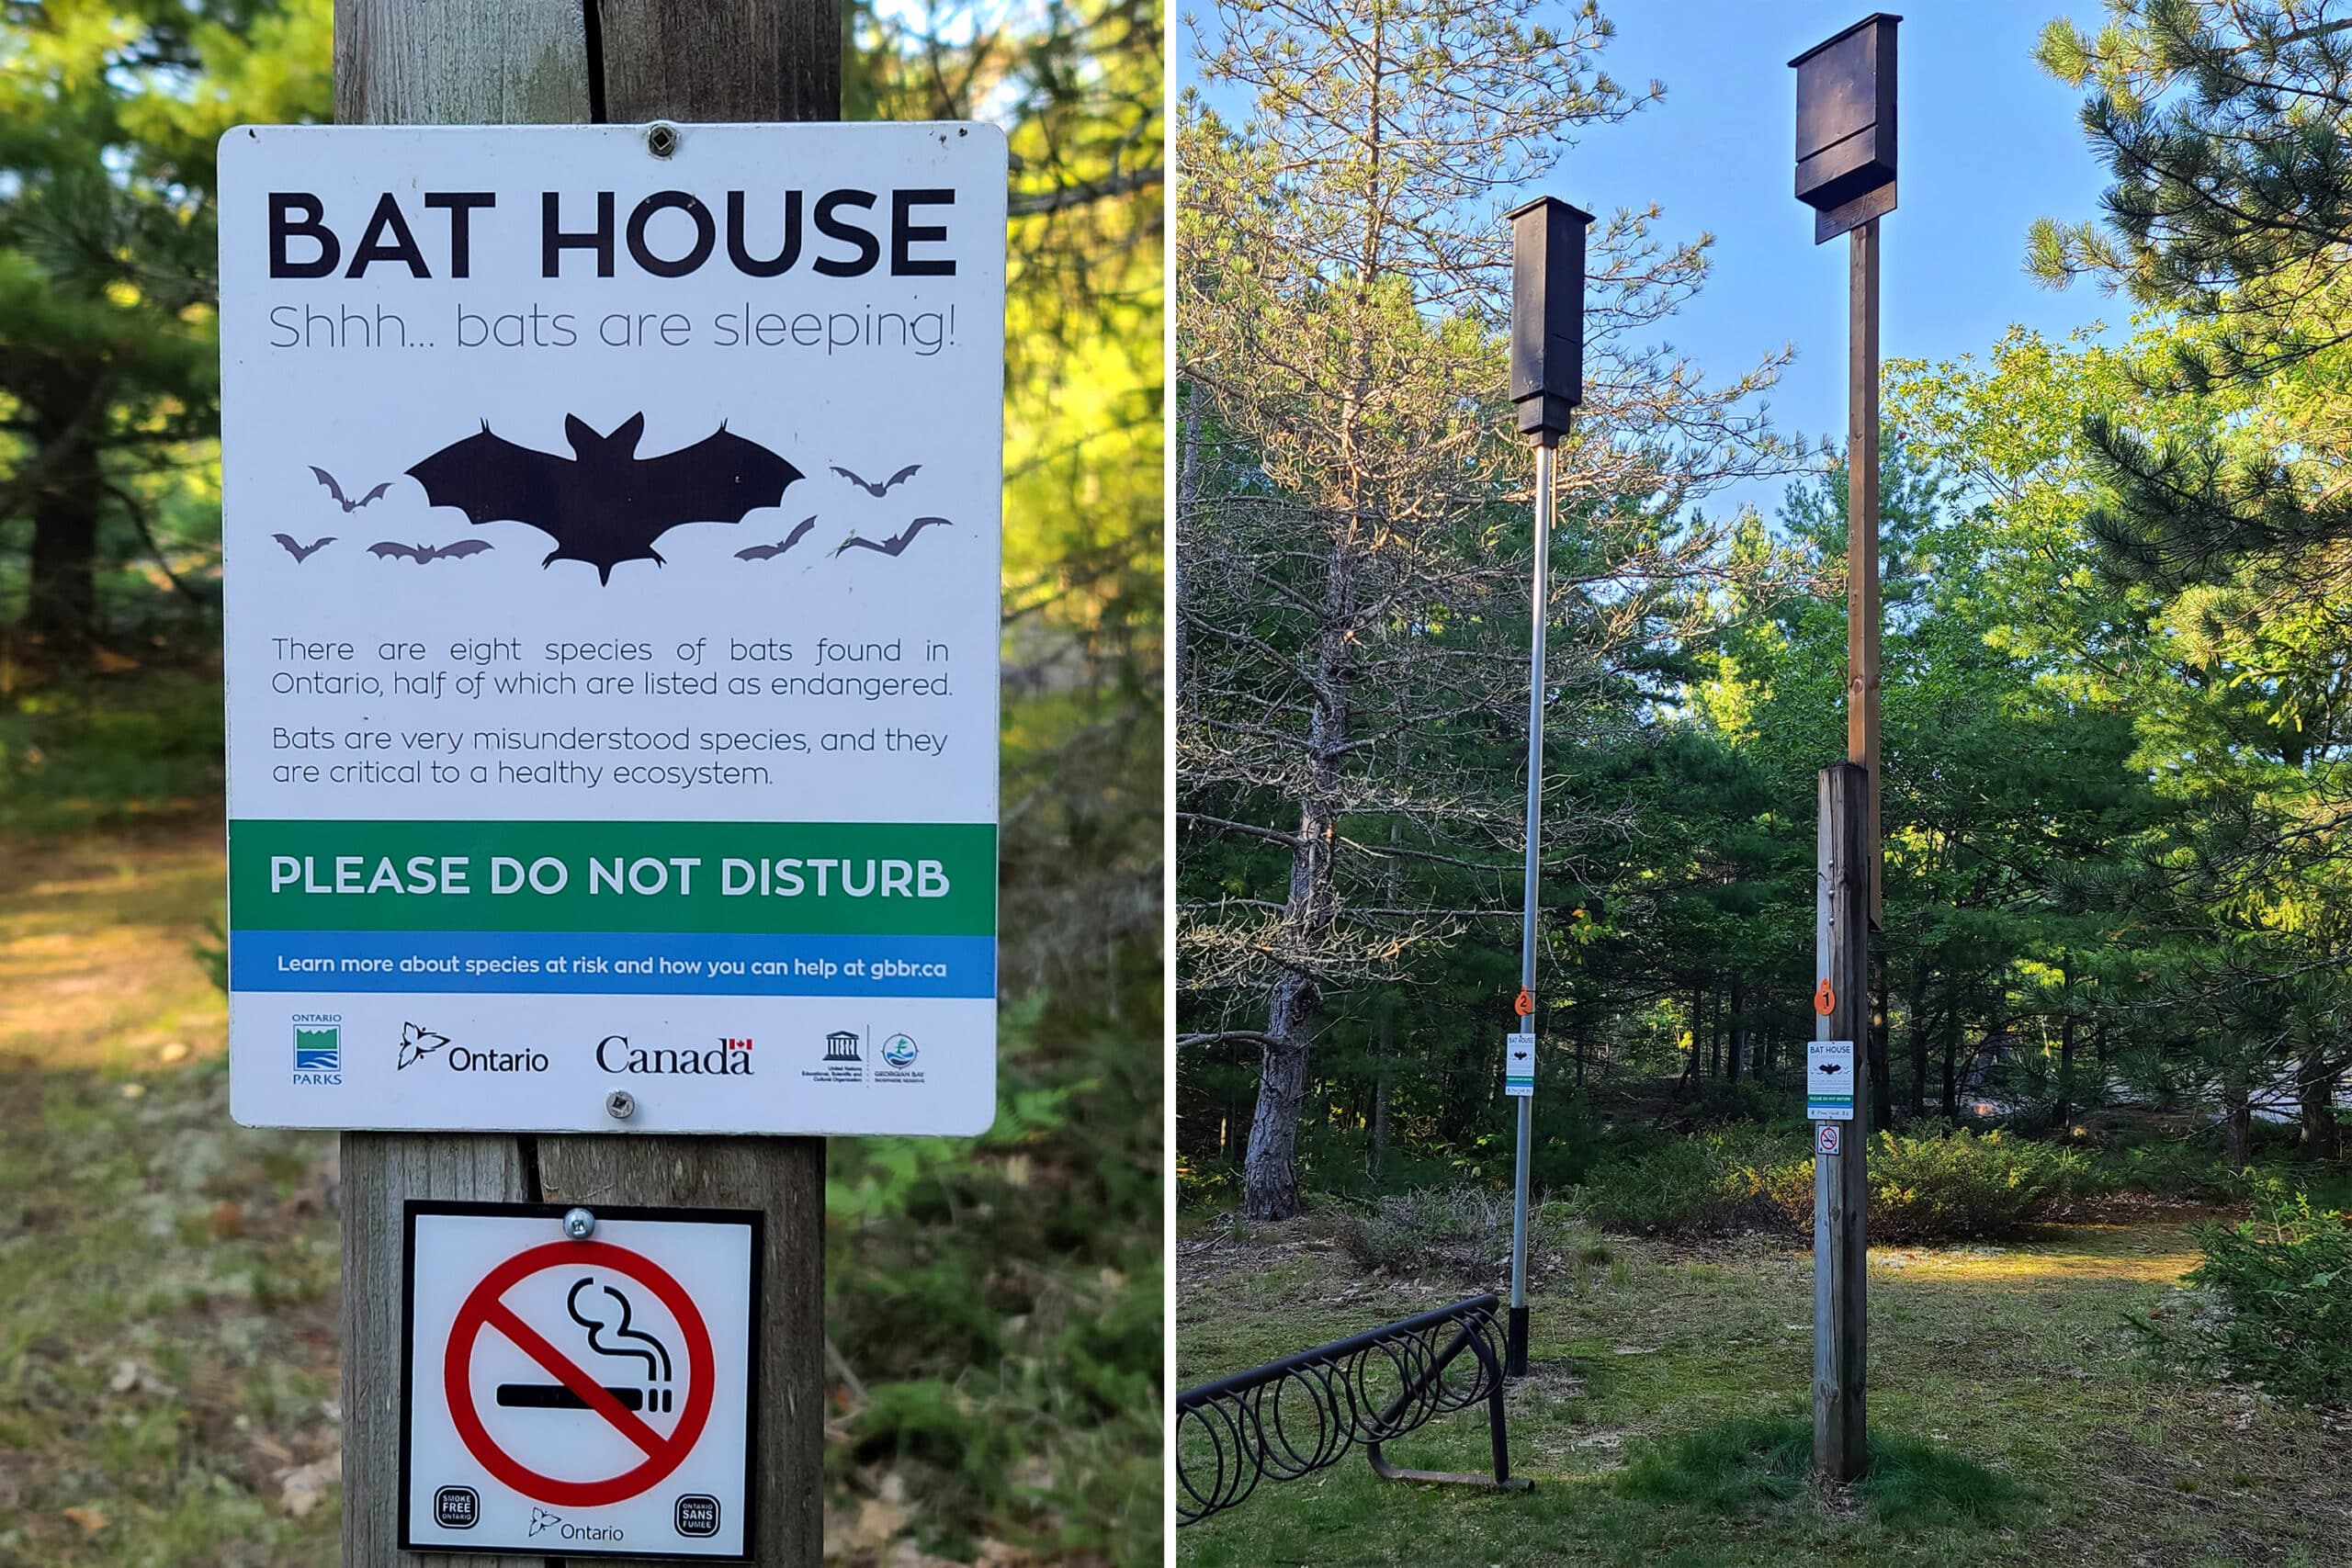 2 part image showing a sign talking about the bat house, and 2 bat houses on tall poles.